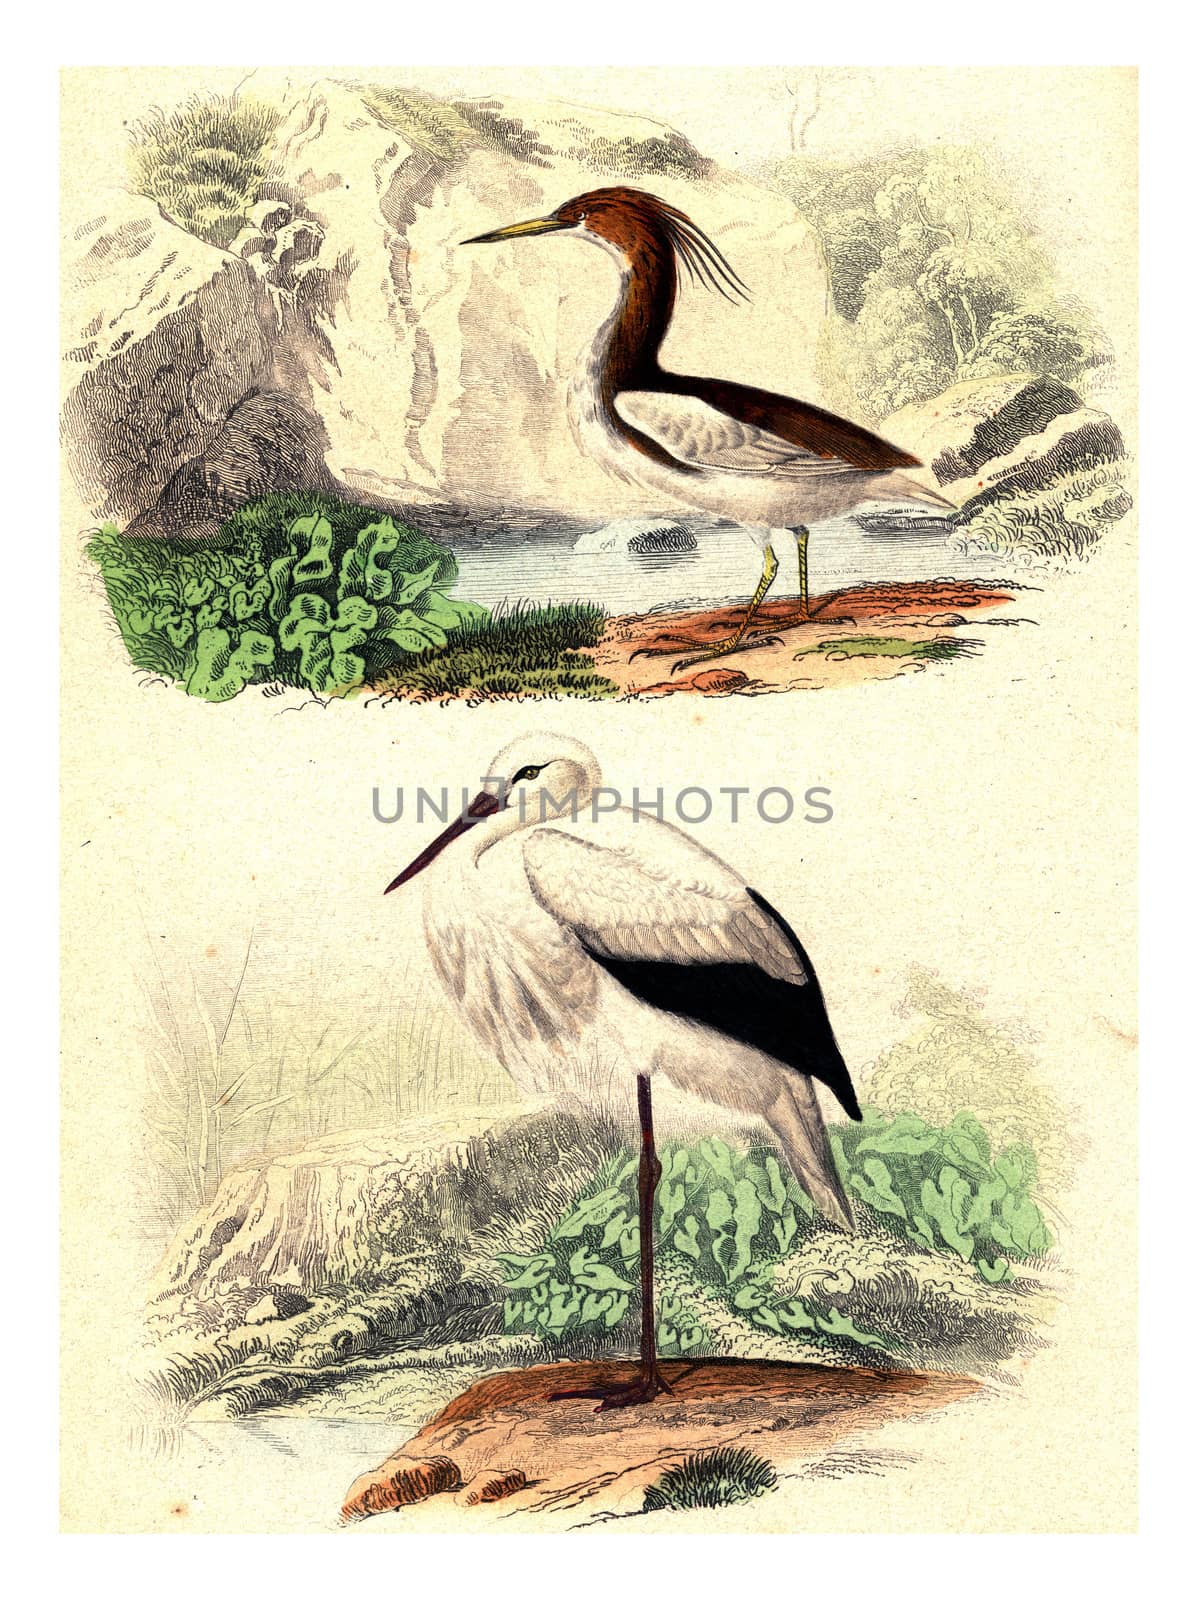 Crabier of mahon, The stork, vintage engraving. by Morphart